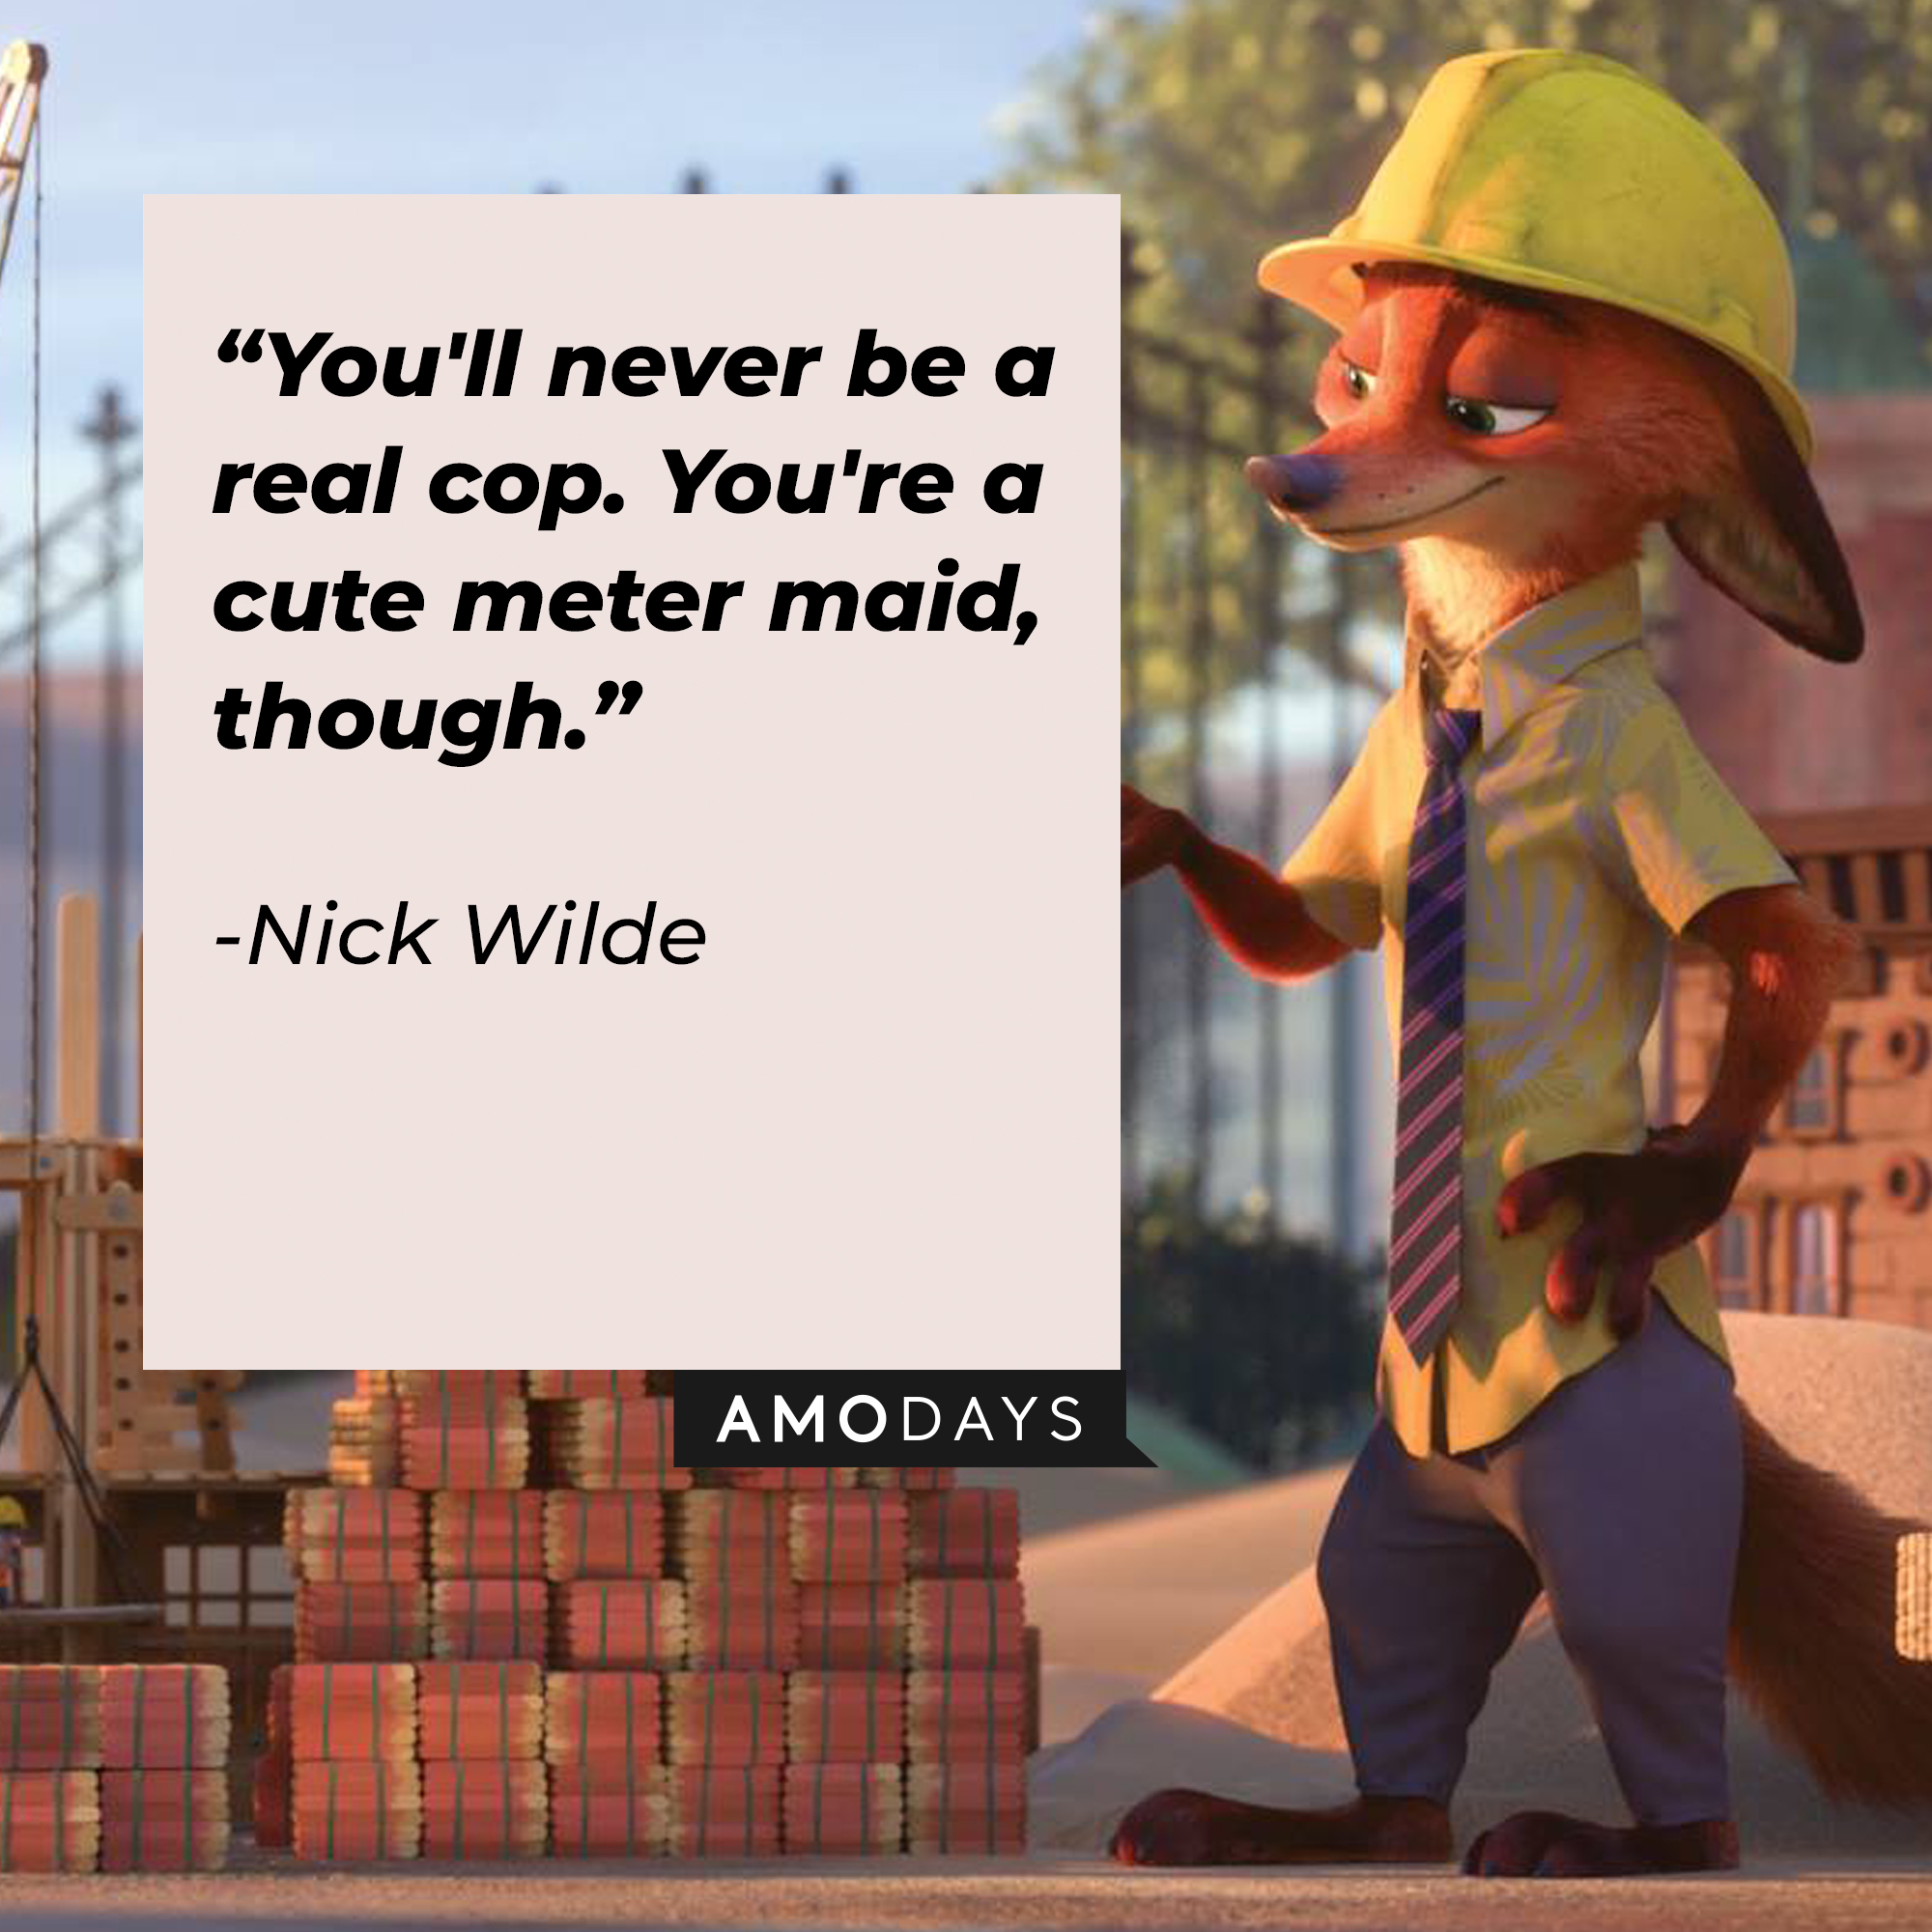 Nick Wilde, with his quote:“You'll never be a real cop. You're a cute meter maid, though.” | Source:  facebook.com/DisneyZootopia